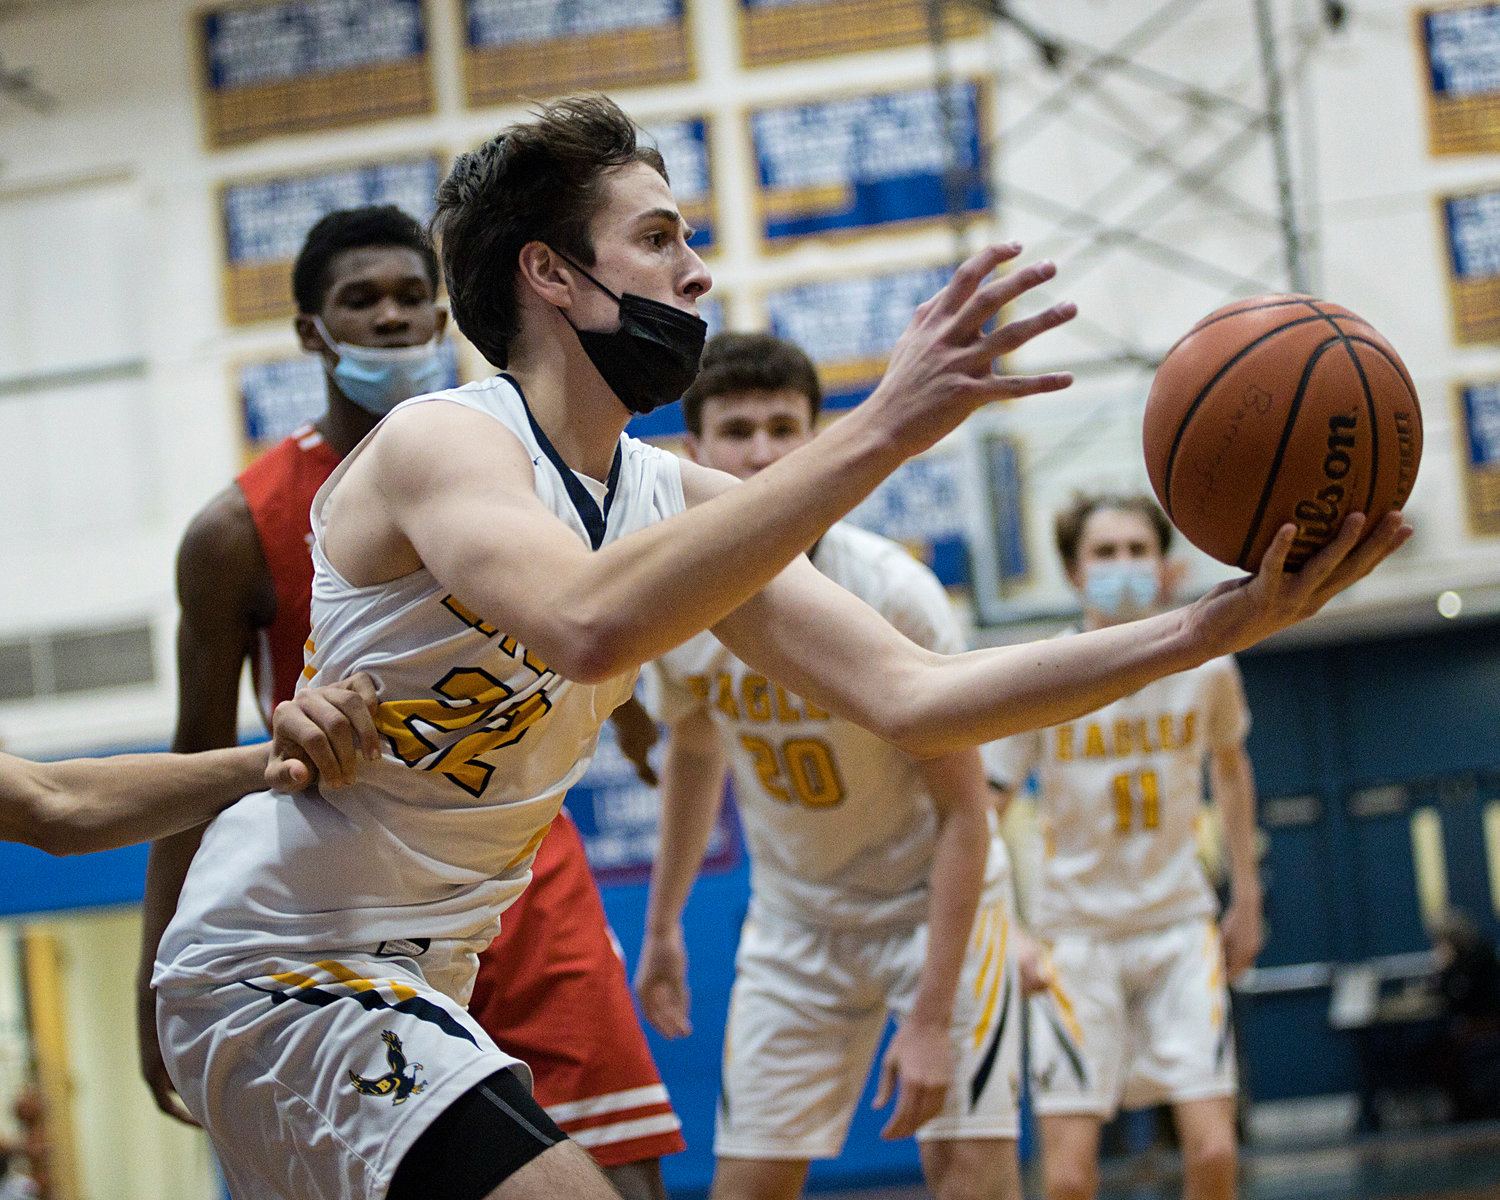 Jack Abadi races after the rebound during Wednesday's game, against East Providence.